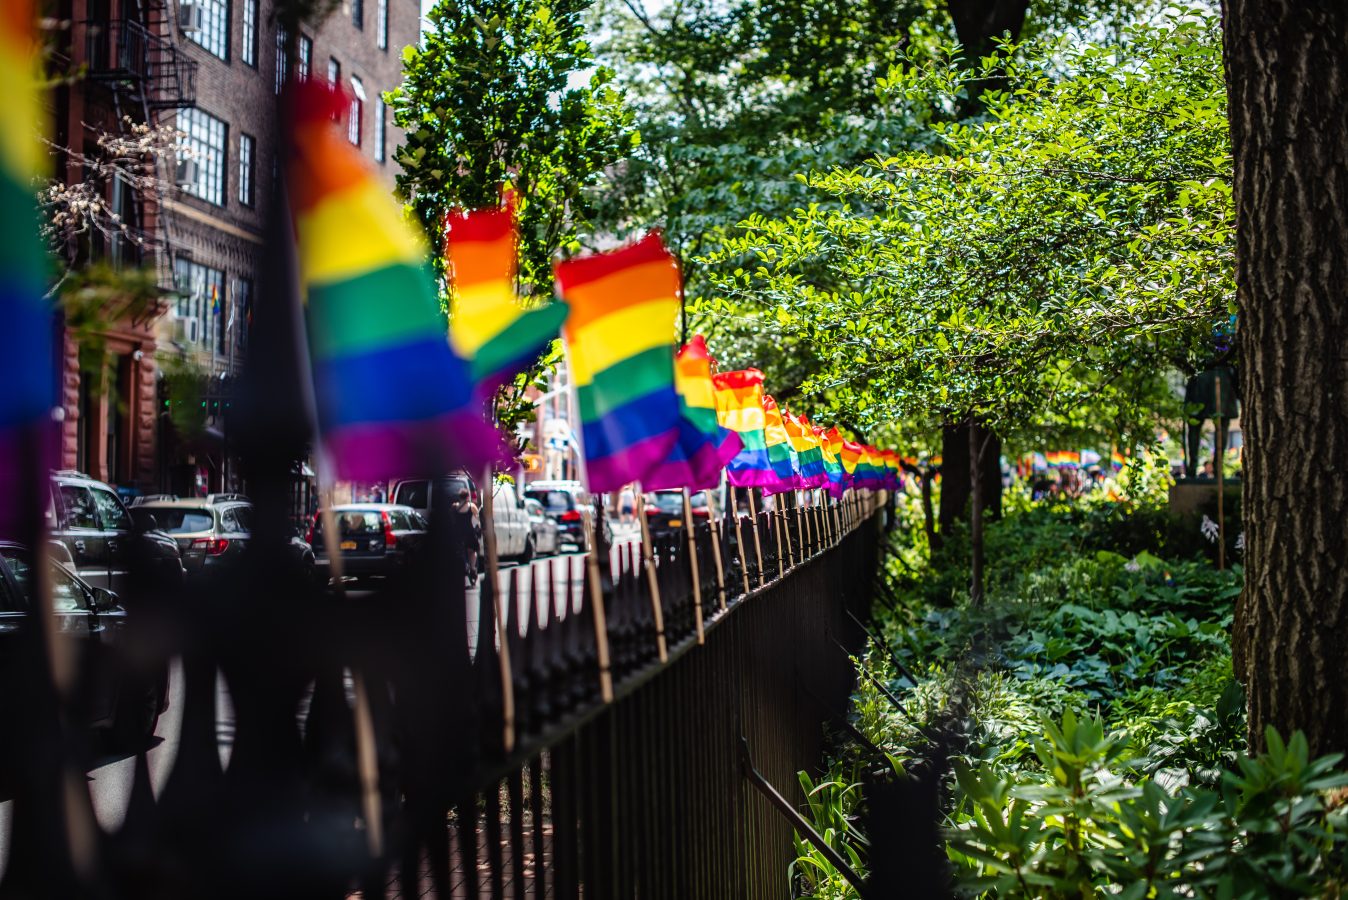 The park outside Stonewall lined with rainbow pride flags.